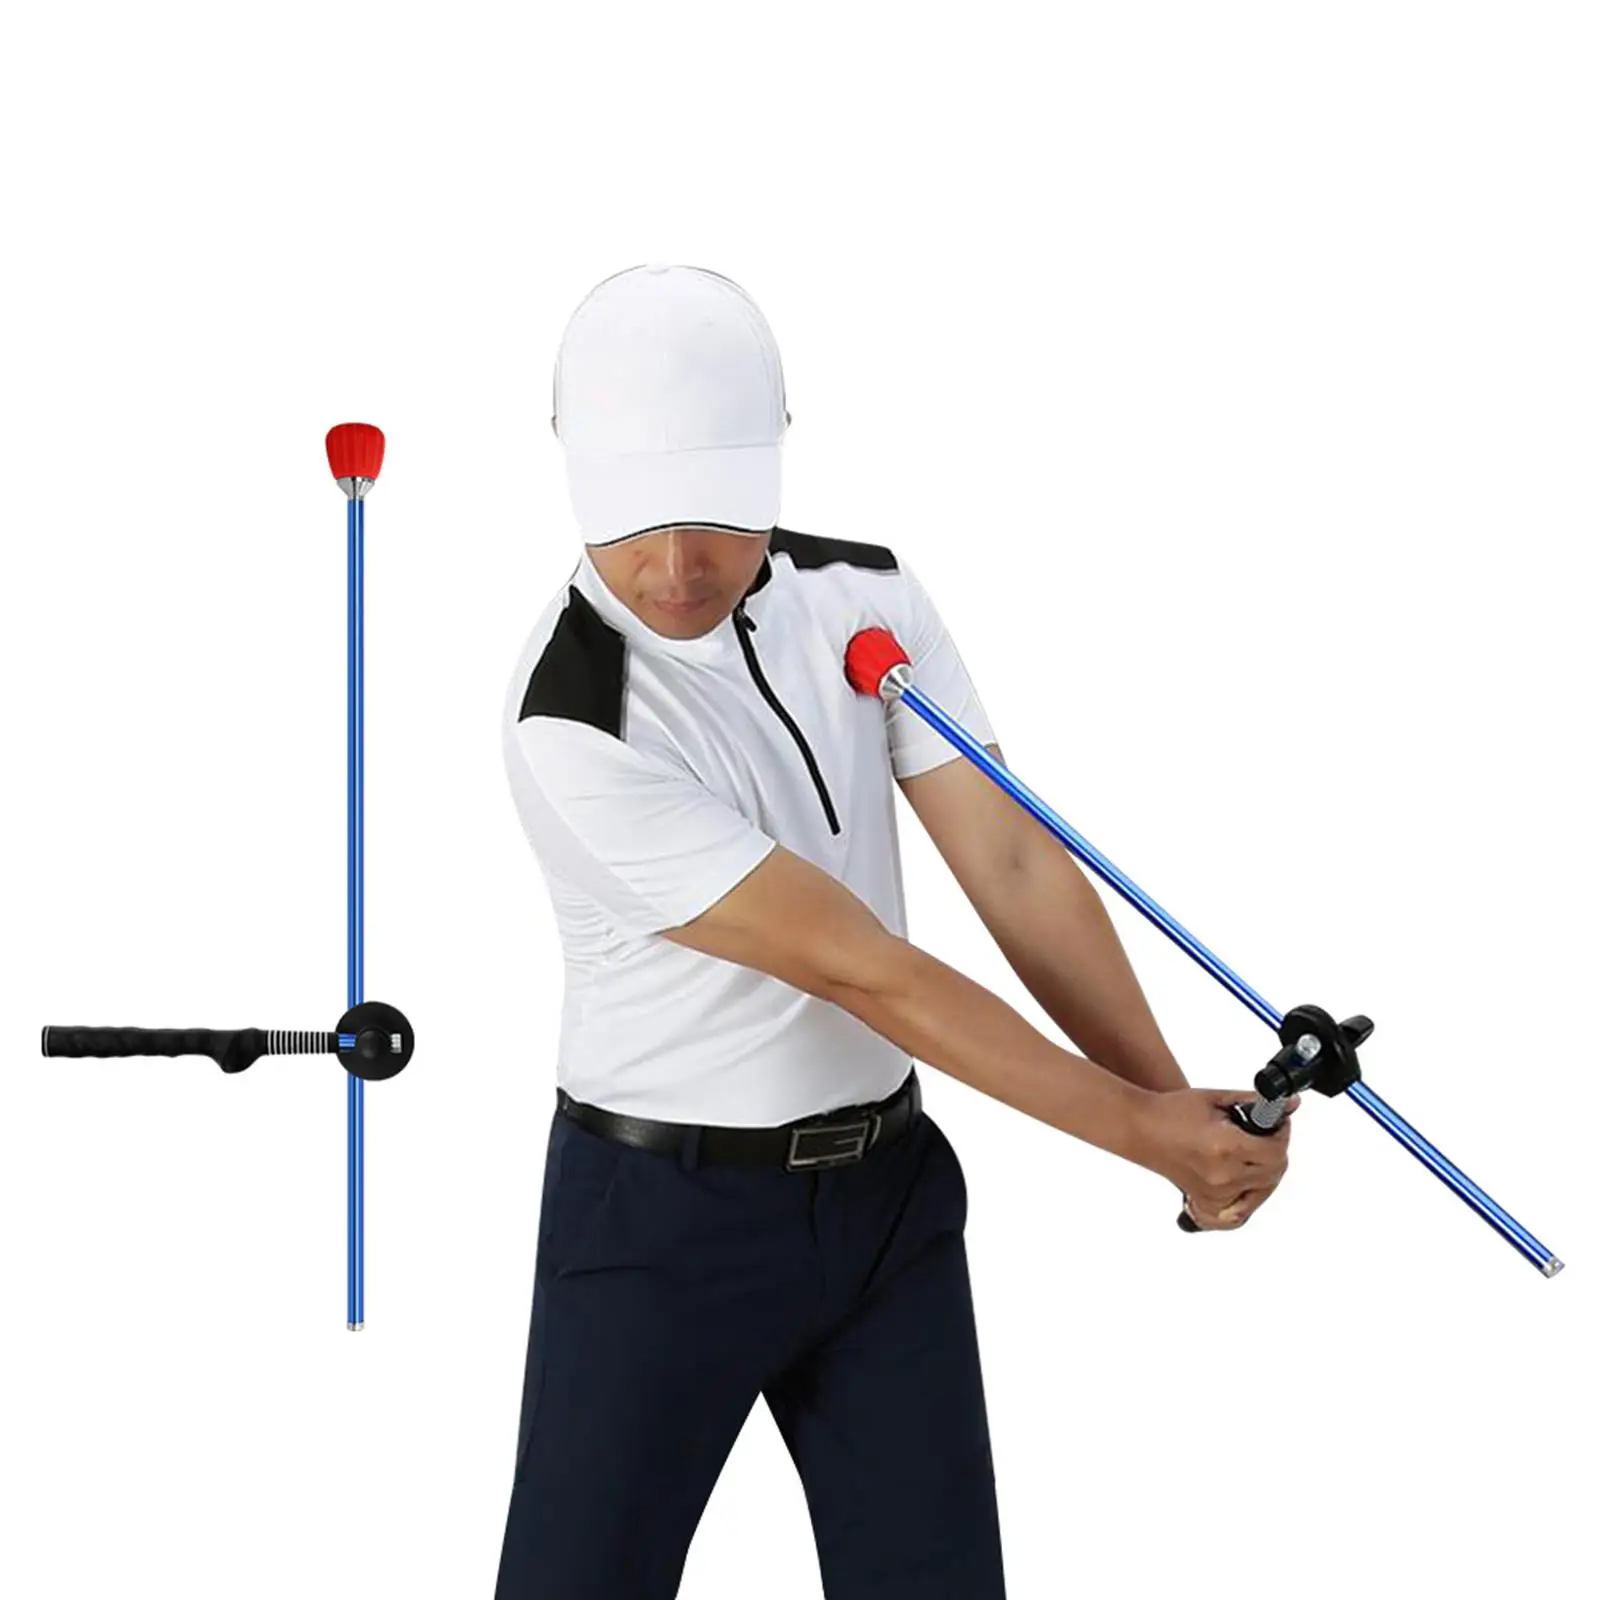 Foldable Golf Swing Trainer Durable Swing Practice Device Action Posture Correction Comfortable Grip for Beginners